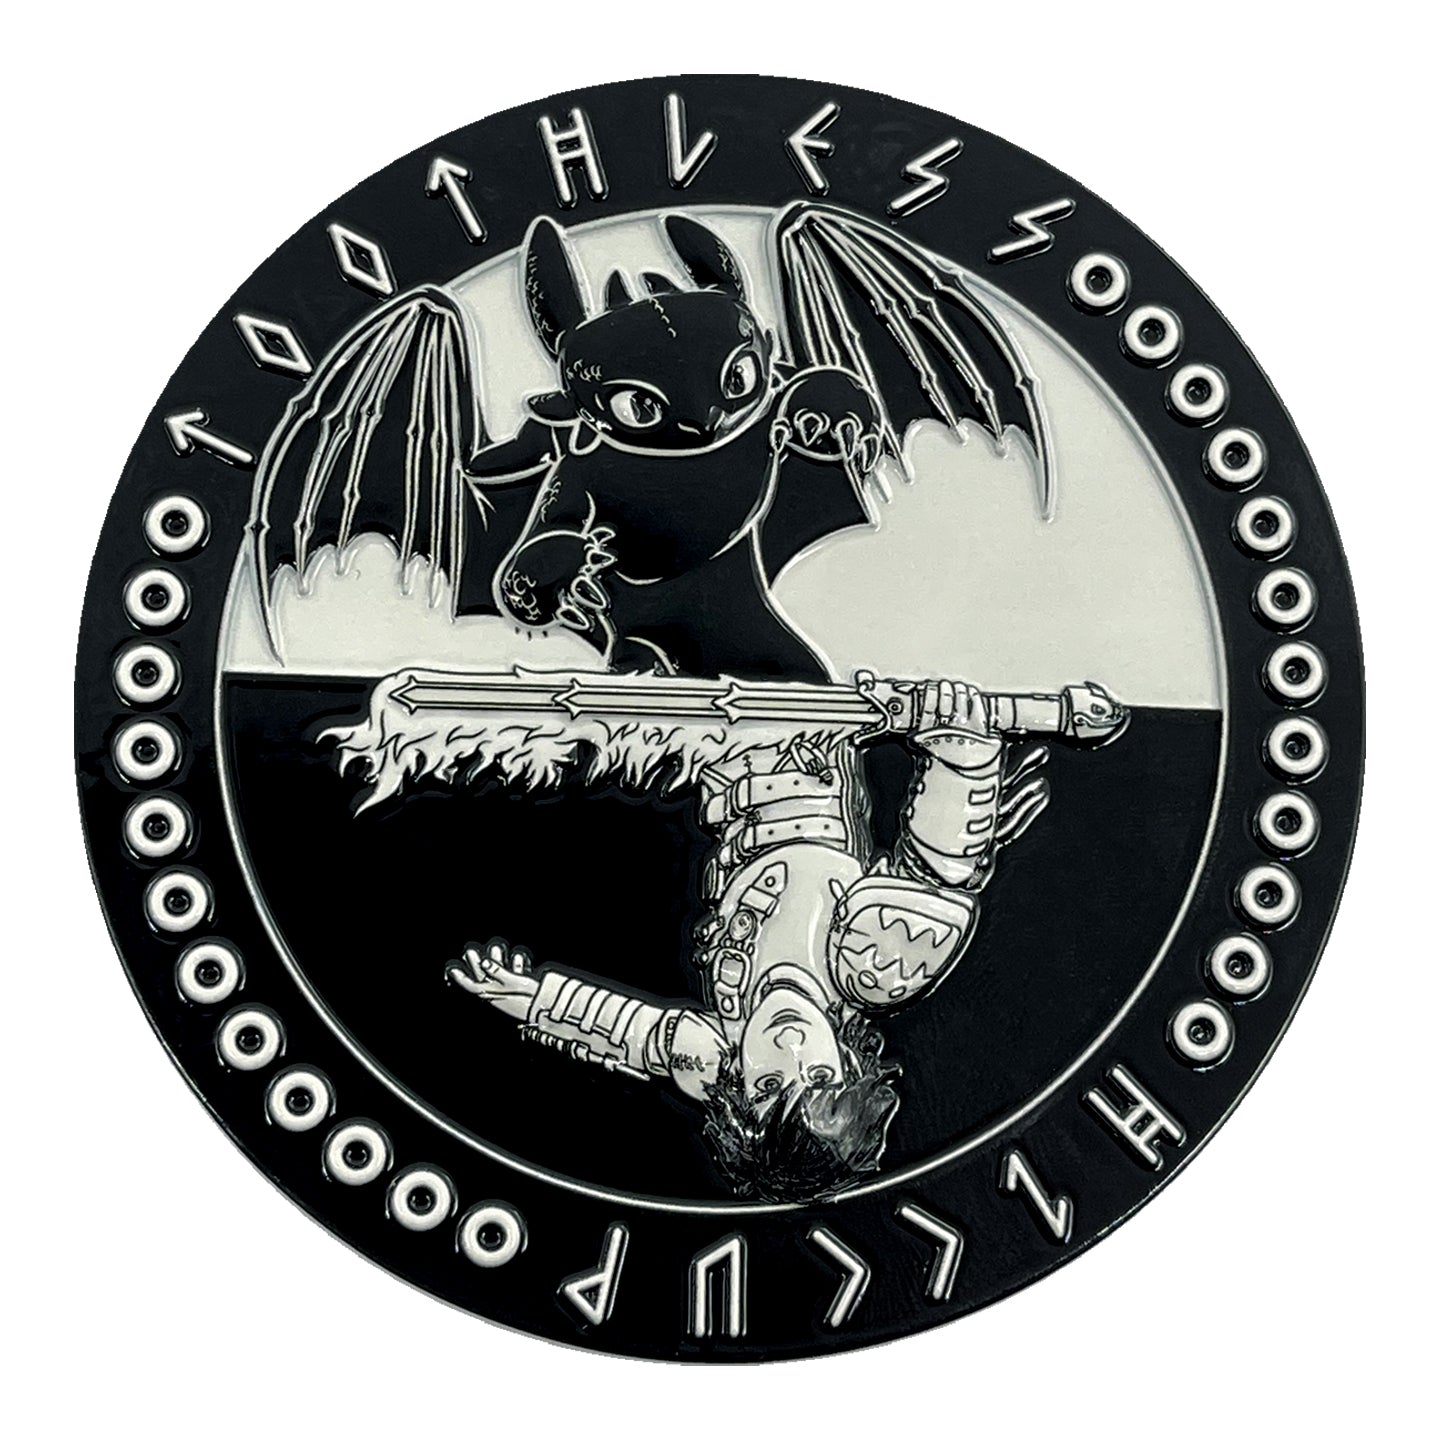 How to Train Your Dragon Limited Edition Medallion